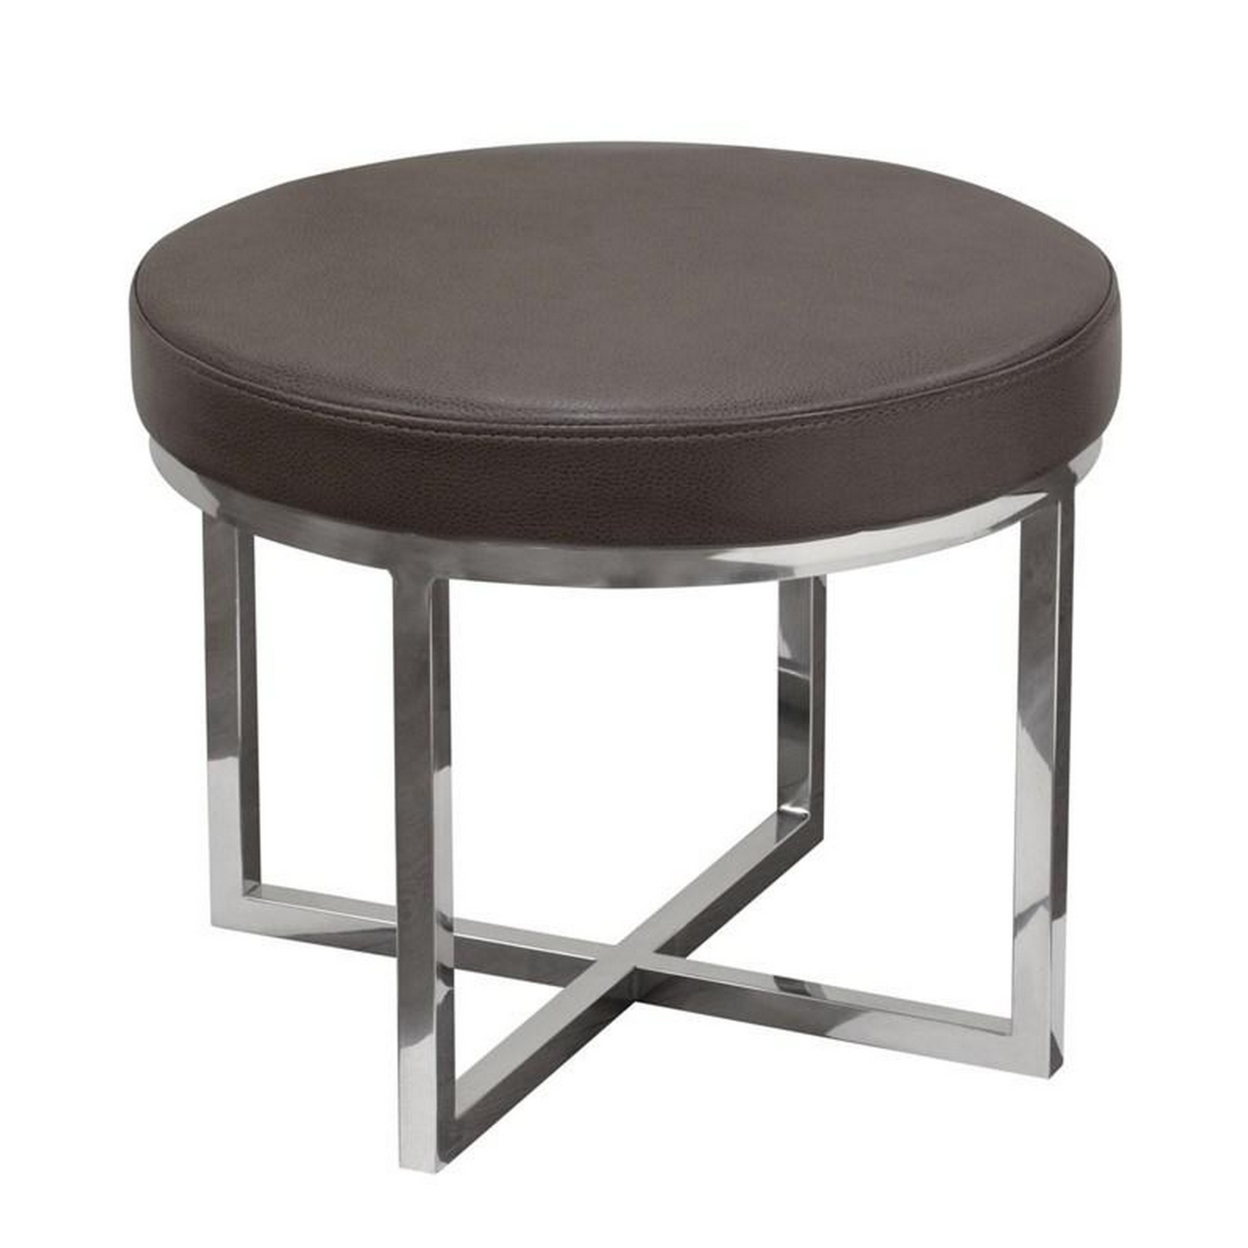 Leather Upholstered Round Accent Stool With Cross Metal Legs, Gray And Chrome- Saltoro Sherpi